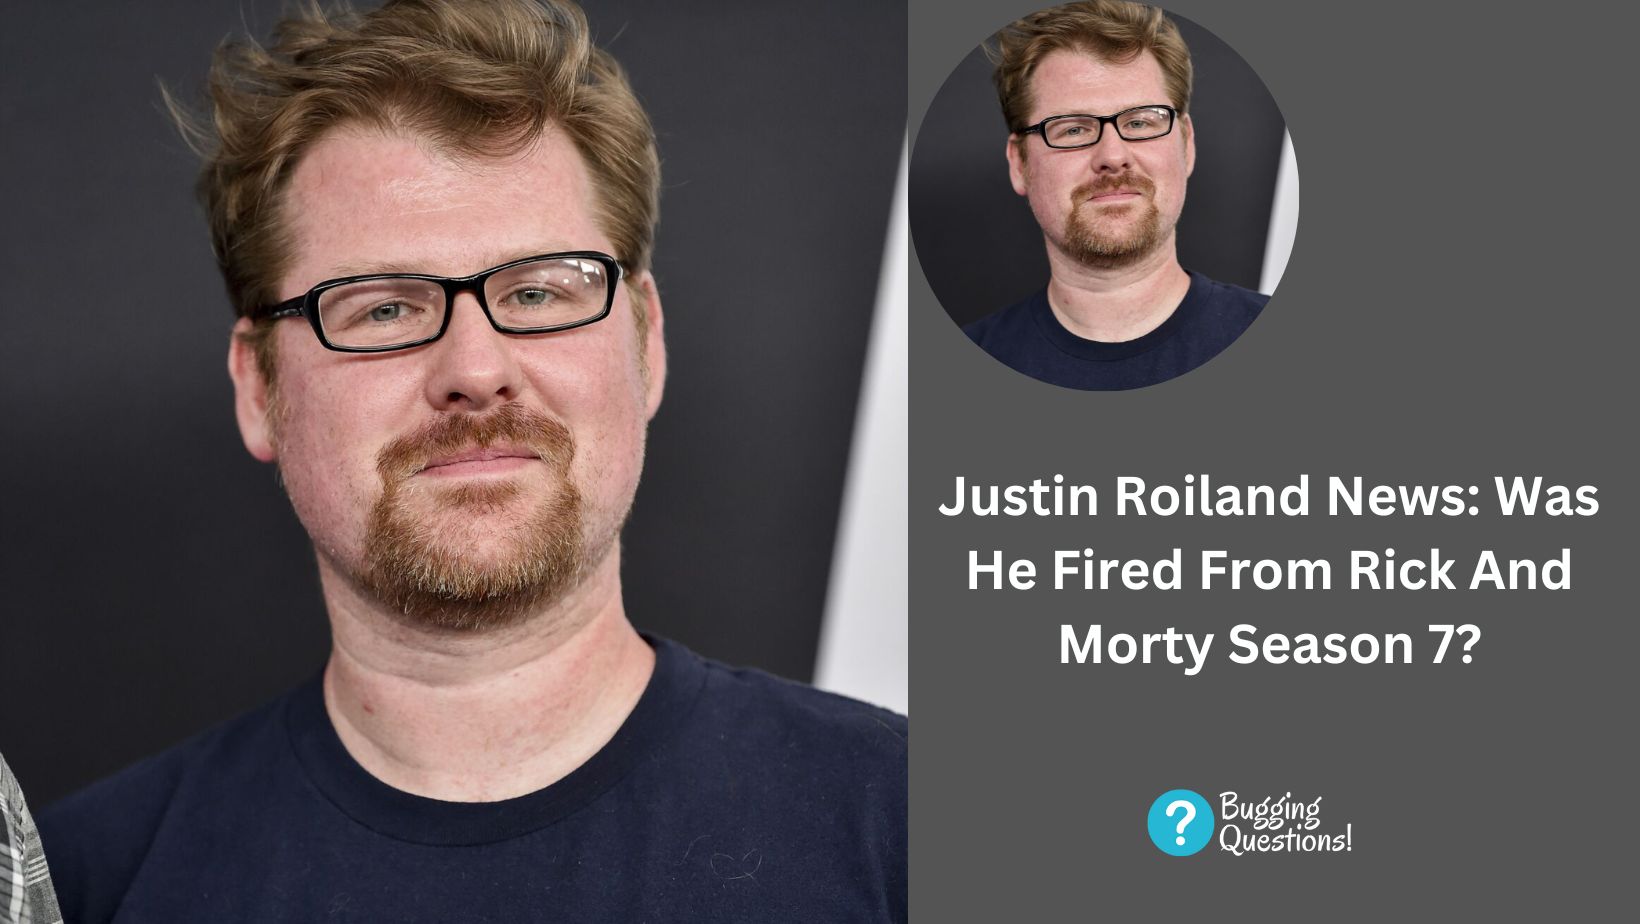 Justin Roiland News: Was He Fired From Rick And Morty Season 7?